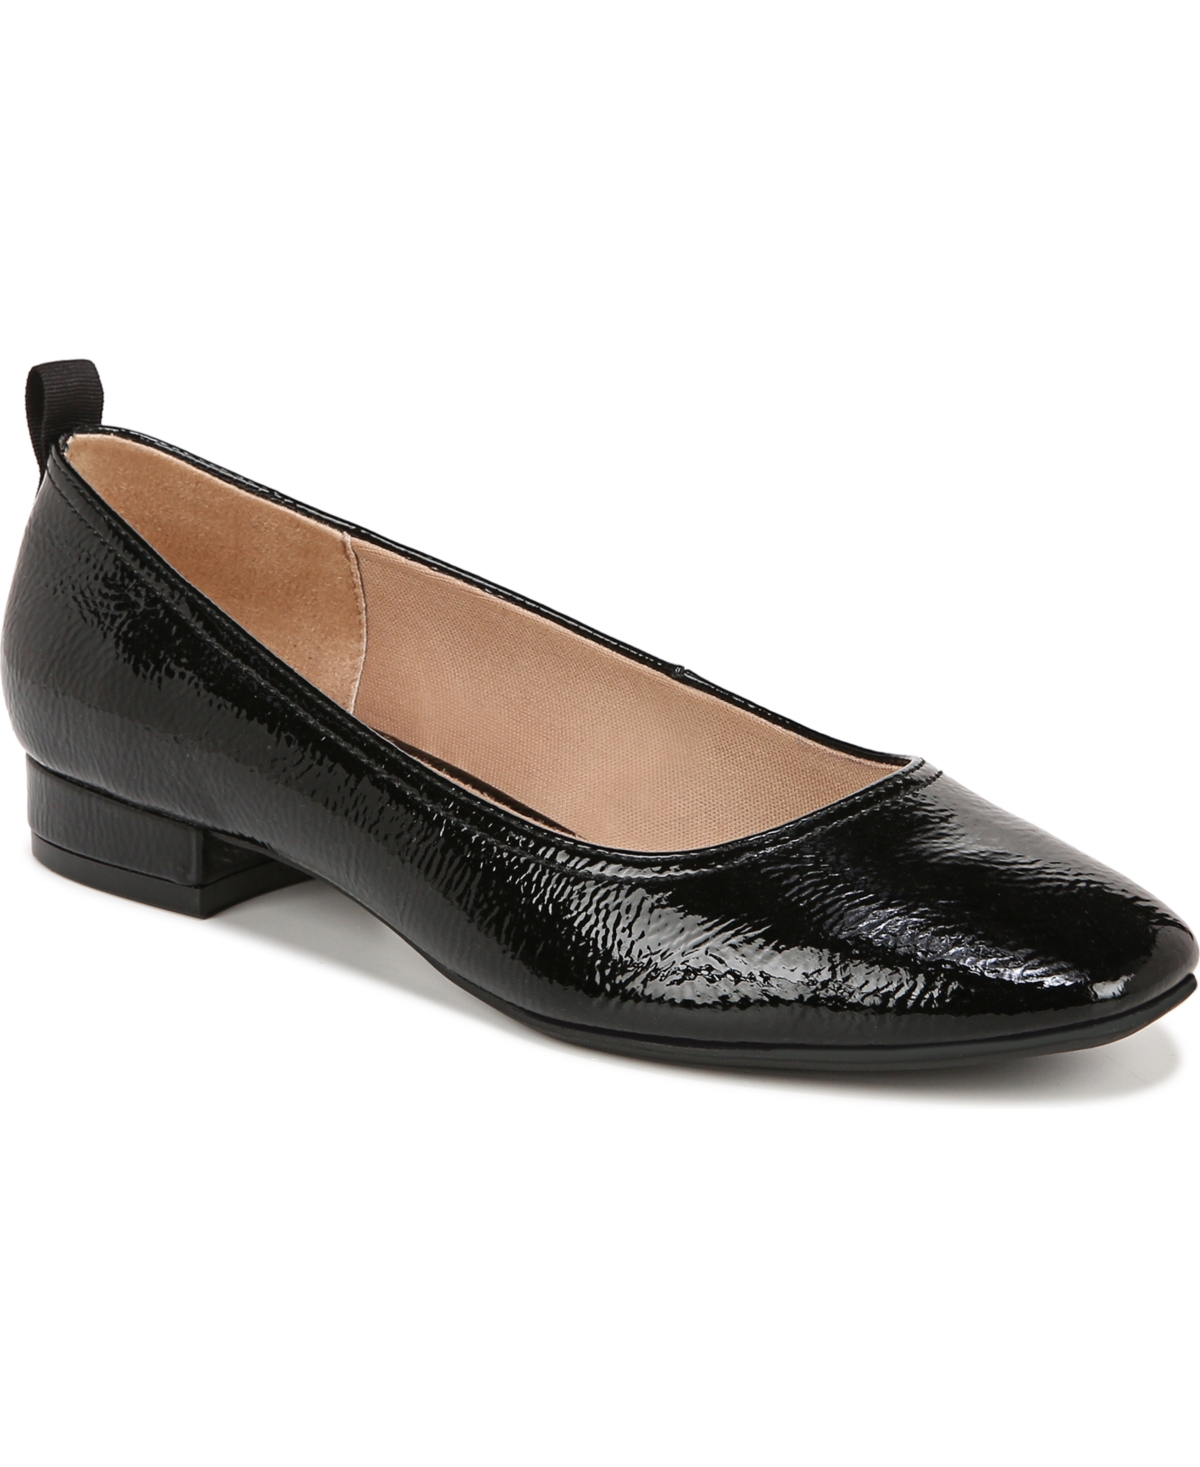 Lifestride Cameo Flats In Black Faux Patent